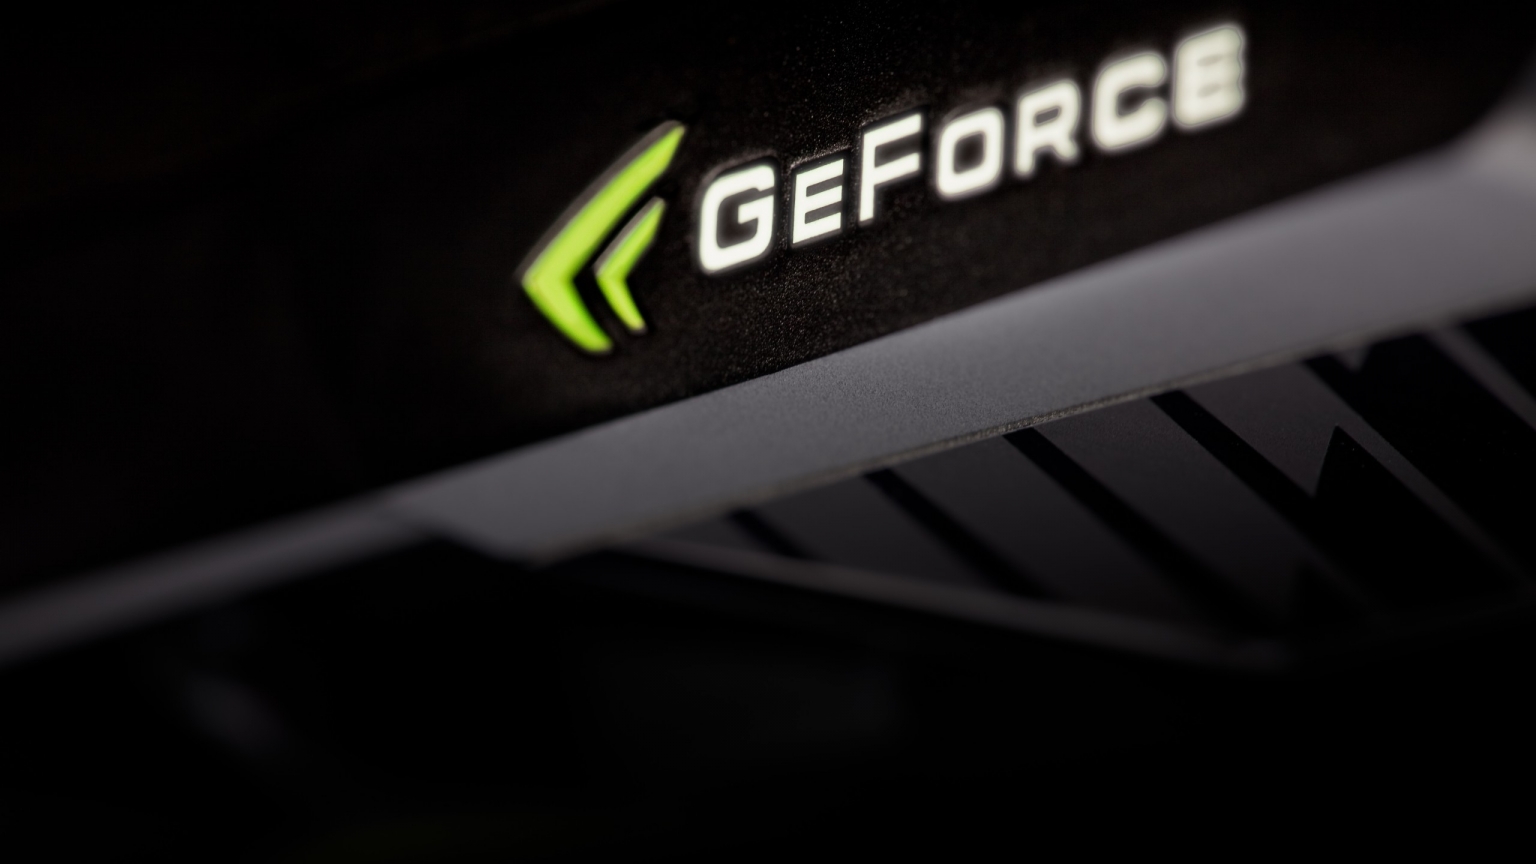 GeForce Graphics for 1536 x 864 HDTV resolution